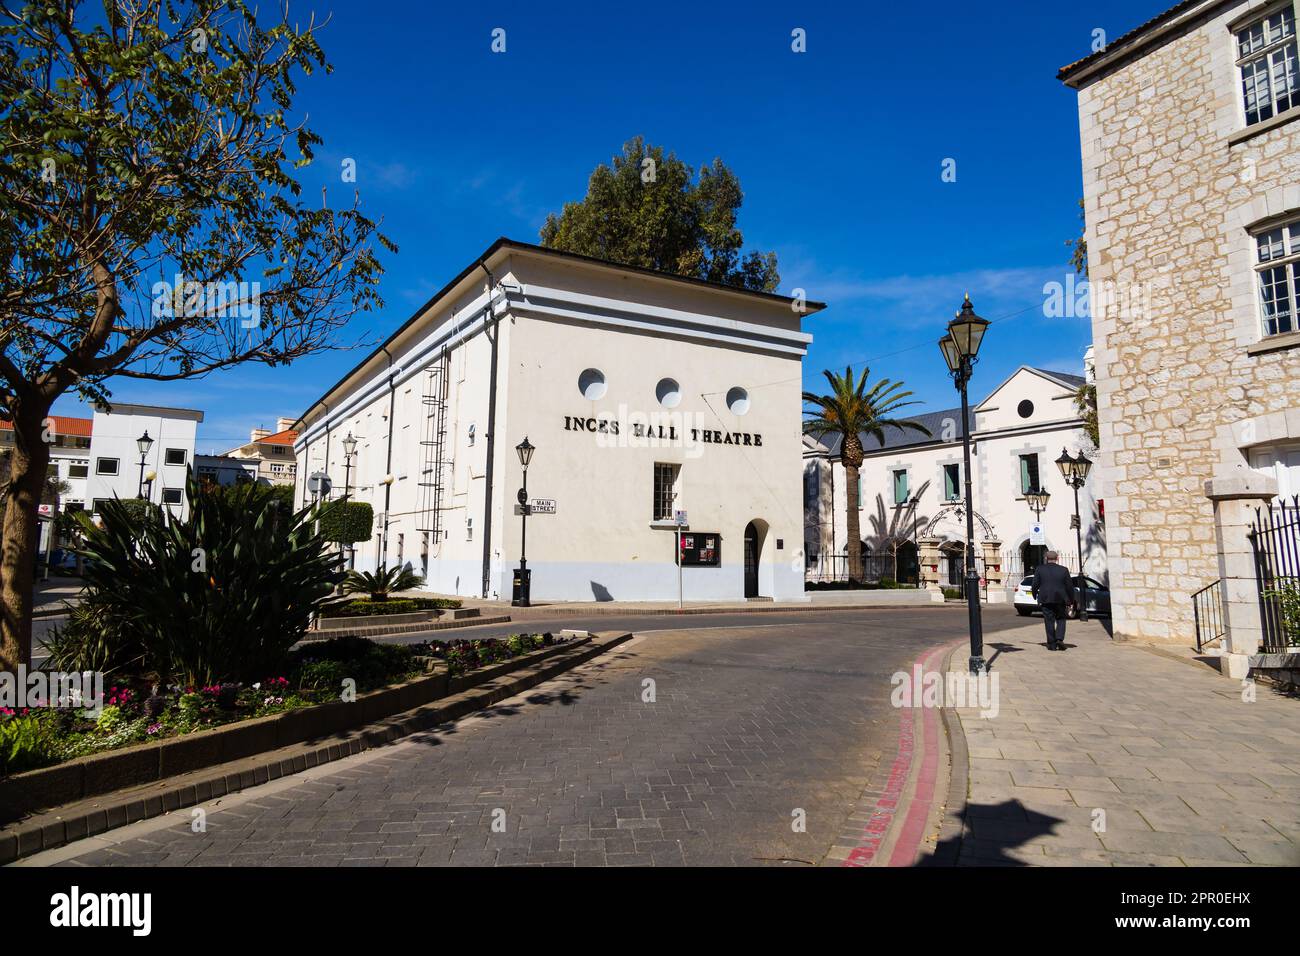 Inces Hall theatre on Main Street. Cultural venue. The British Overseas Territory of Gibraltar, the Rock of Gibraltar on the Iberian Peninsula. Stock Photo